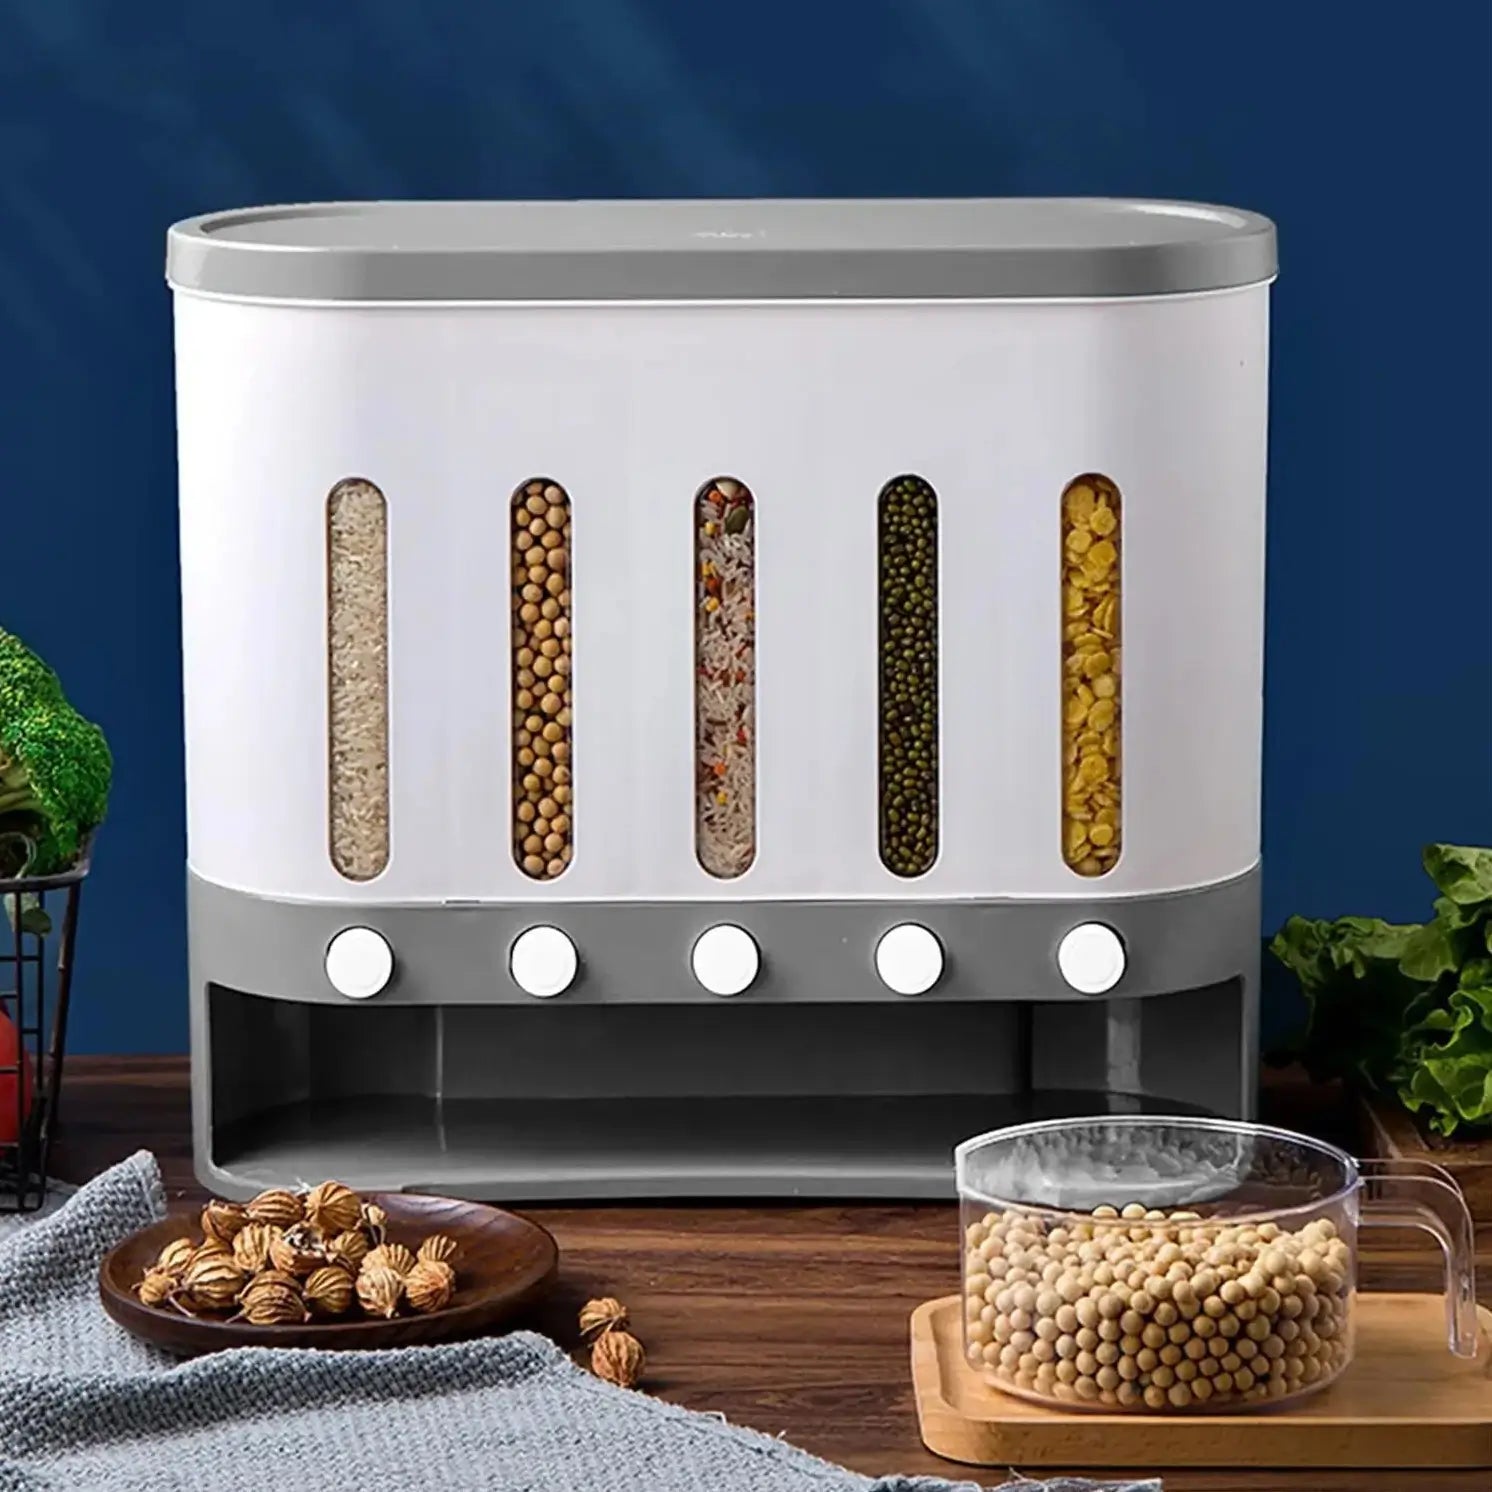 The Cereal Dispenser with its 5 grids full, resting on a wooden surface In front of a blue wall, surrounded by condiments.